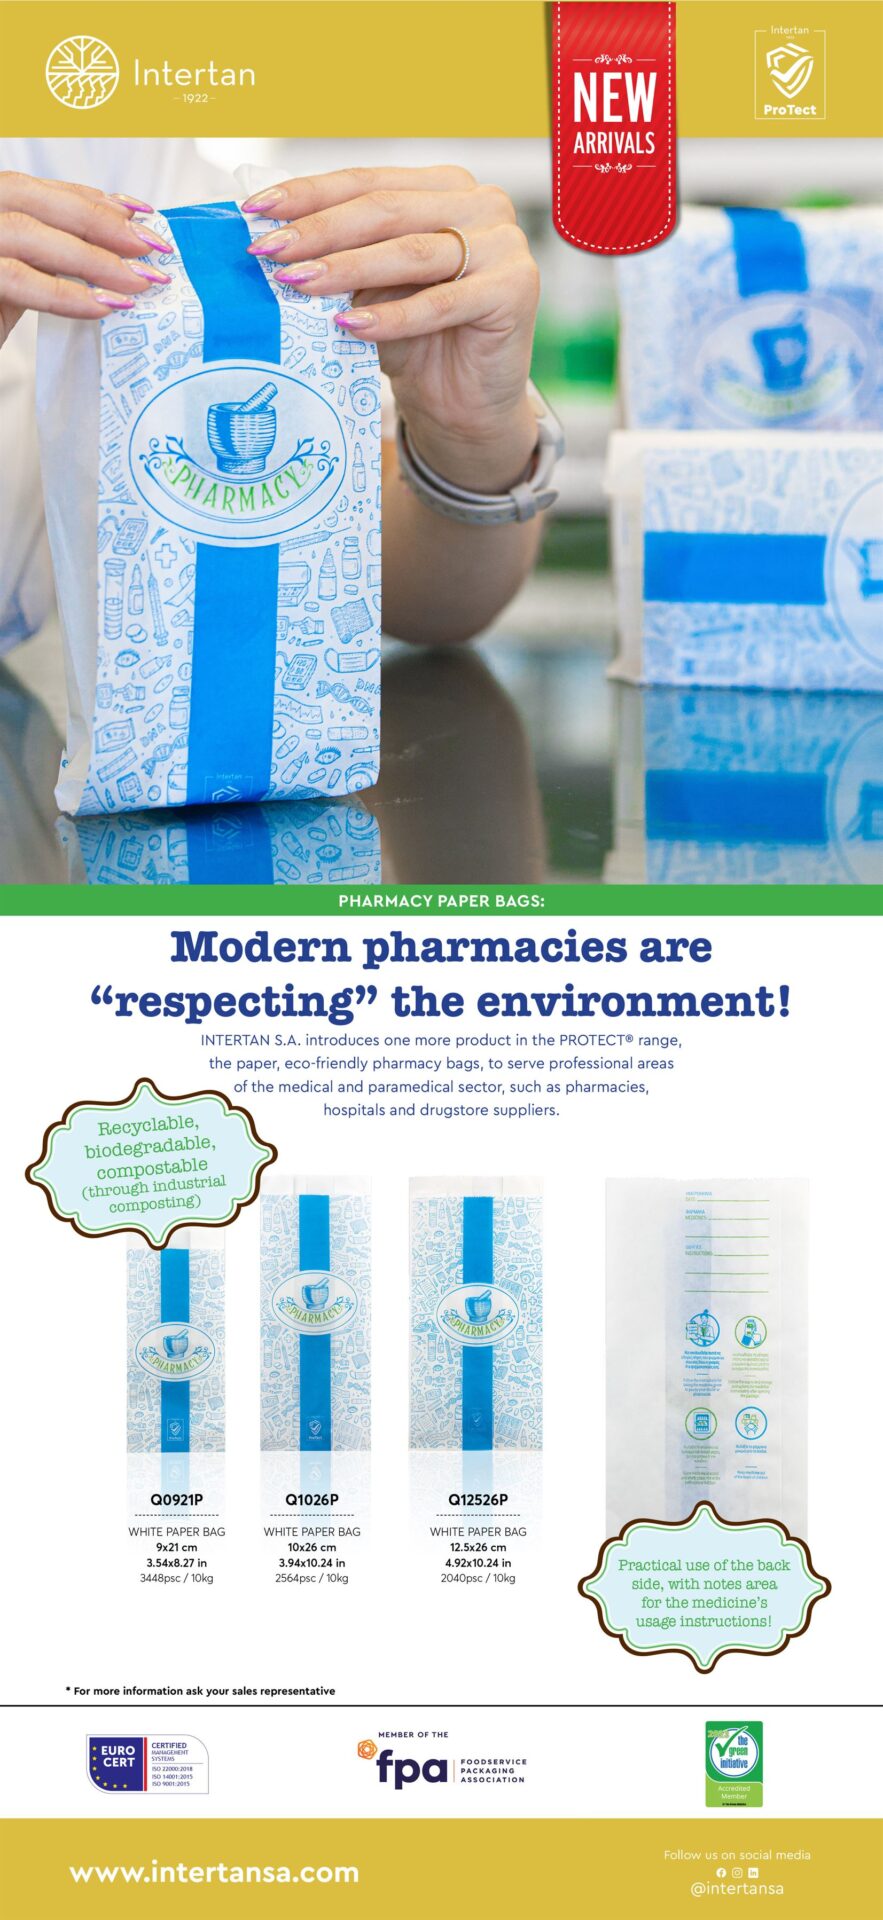 New Paper Pharmacy Bags INTERTAN PROTECT® Newsletter | Intertan S.A.